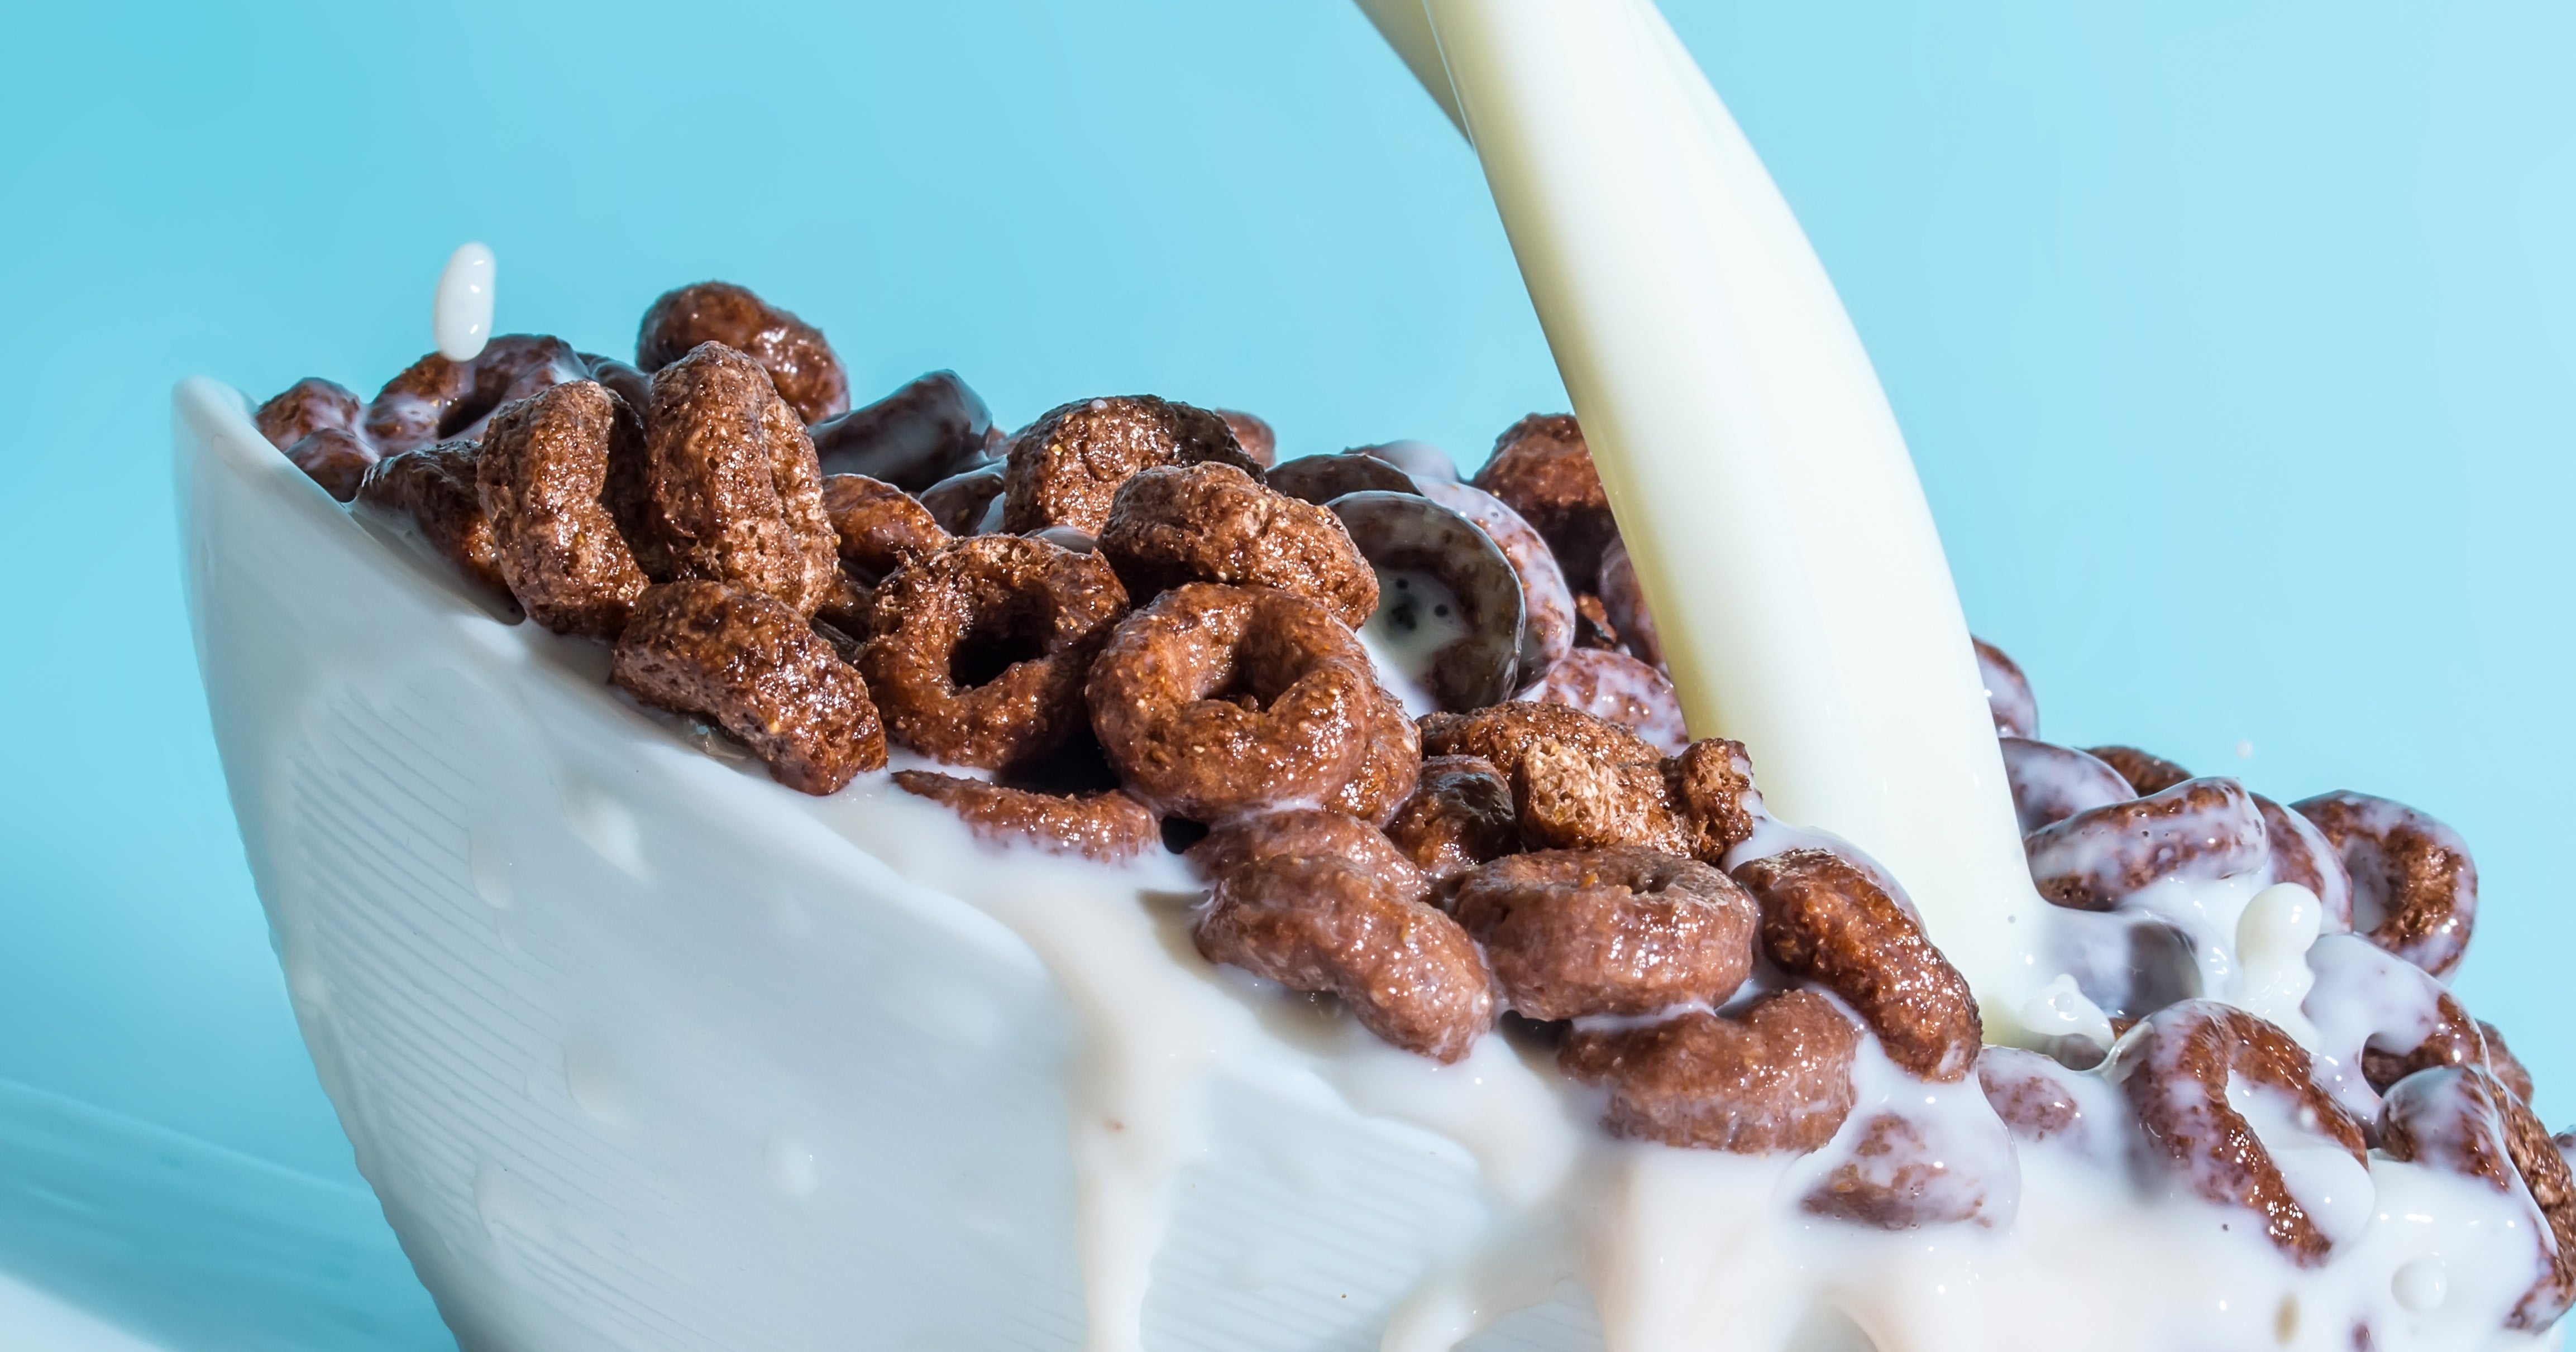 Cocoa Puffs Cereal (History, FAQ, Pictures & Commercials) - Snack